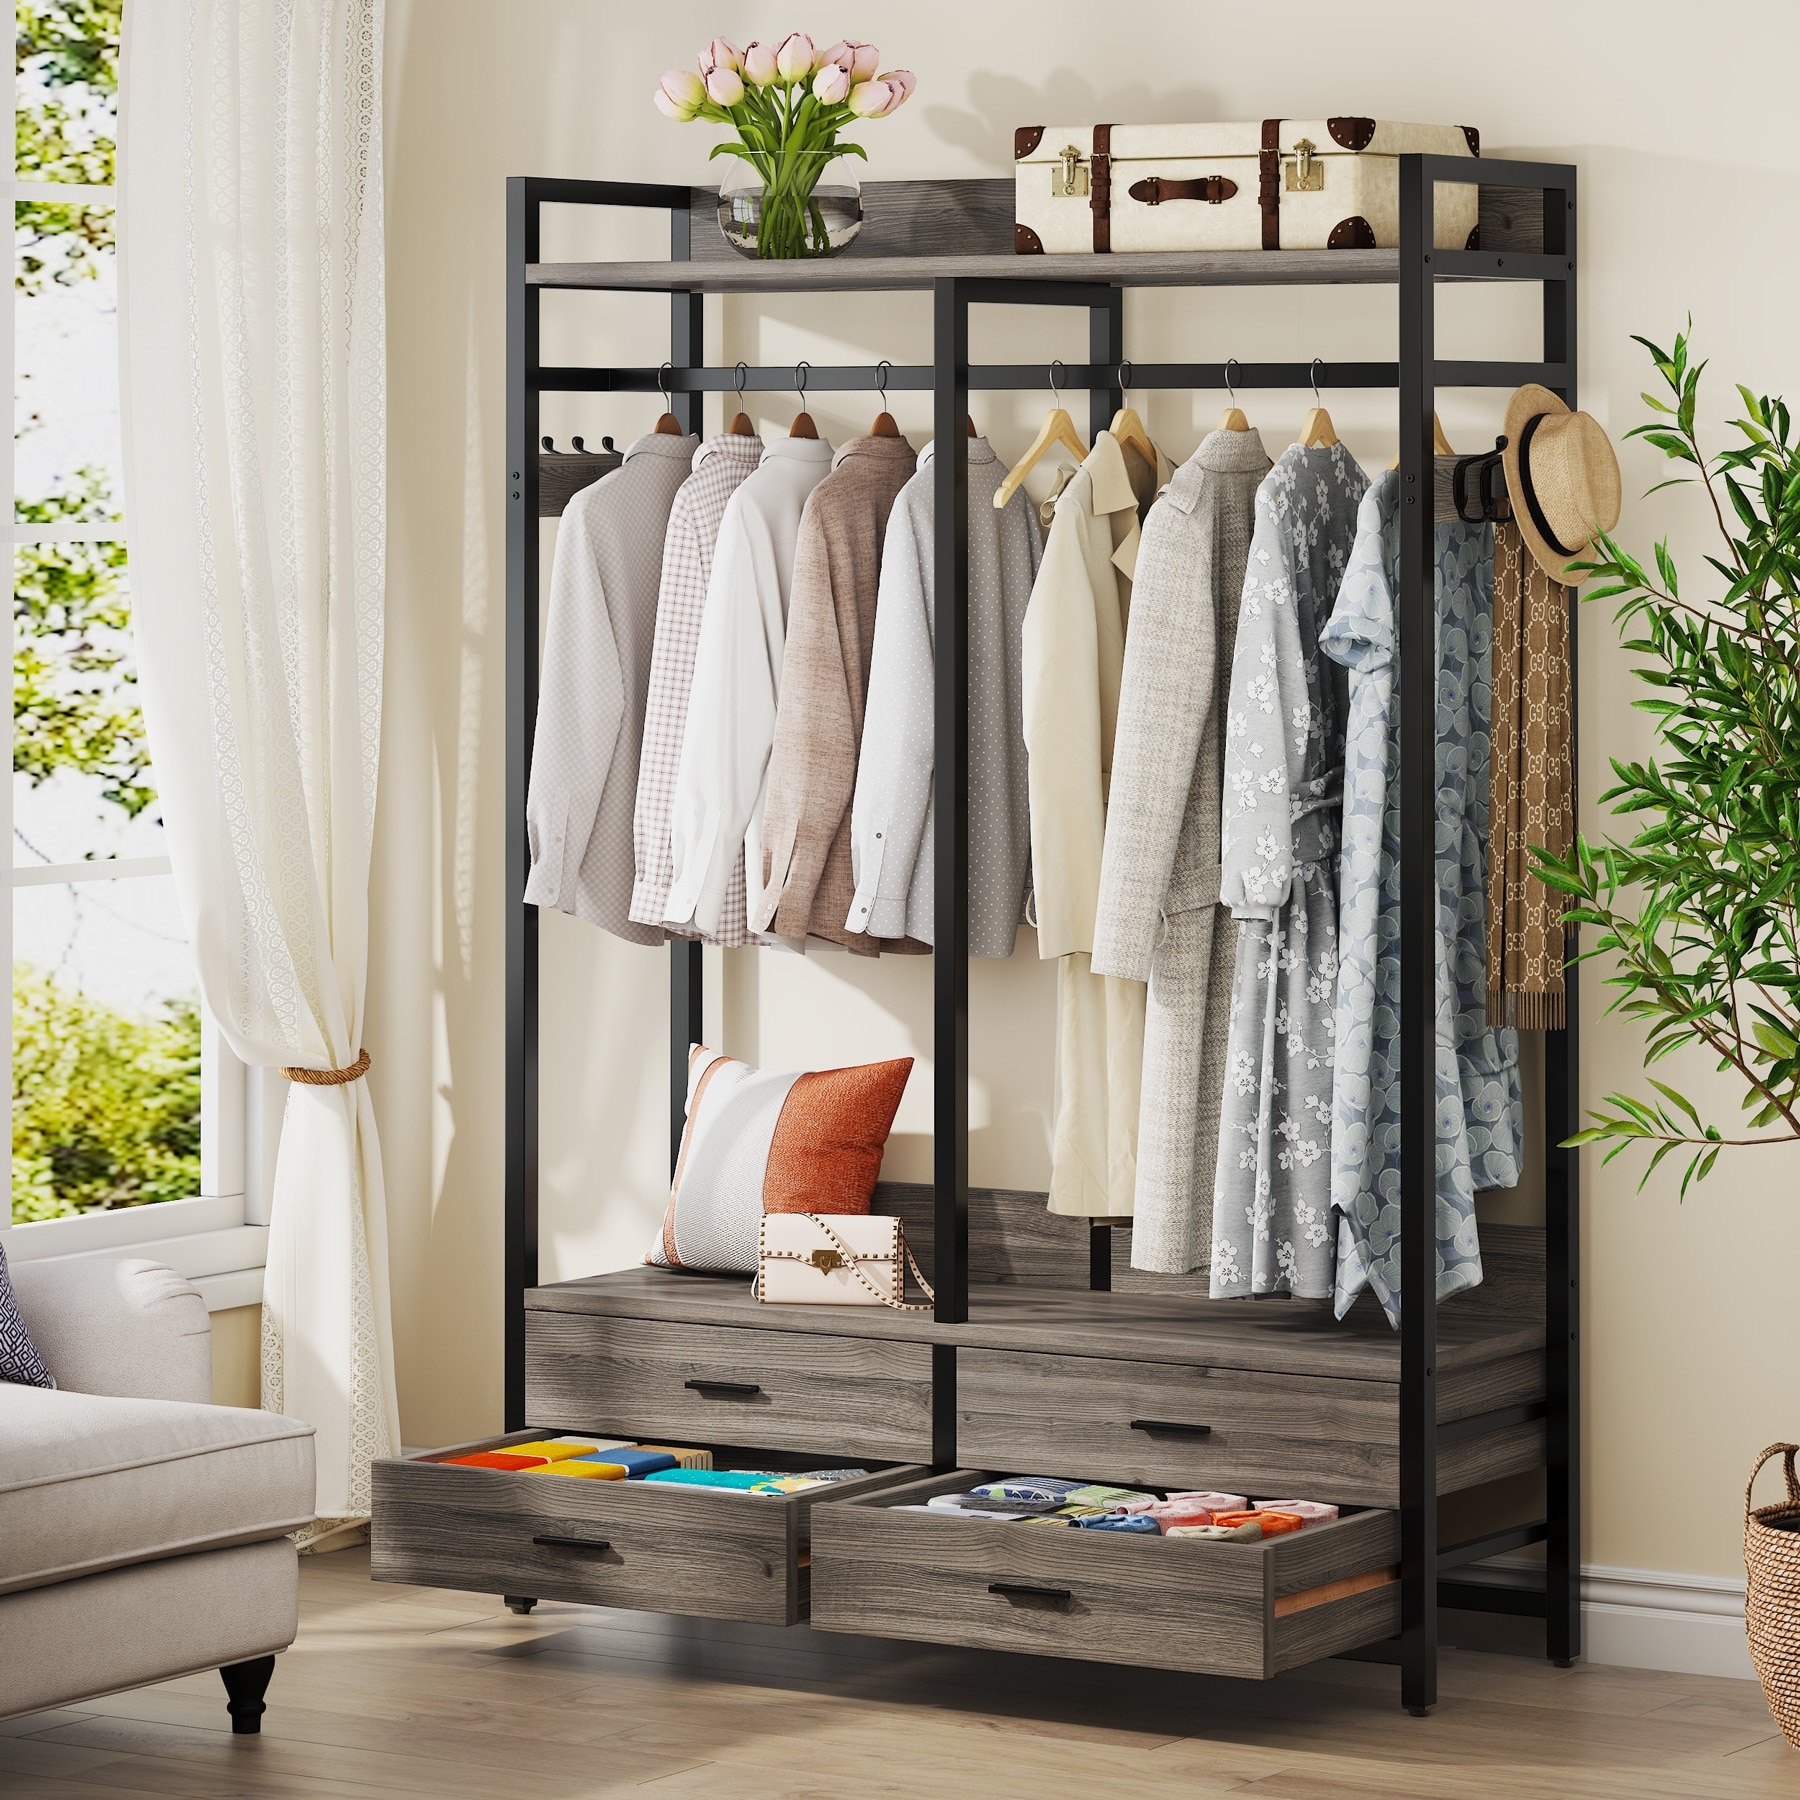 https://ak1.ostkcdn.com/images/products/is/images/direct/3a9d9e14e33960aa5115e7ea41b6ec2de70f5c32/Clothing-Rack-Wardrobe-Closet-for-Hanging-Clothes%2C-Garment-Organizer-Rack-for-Bedroom.jpg